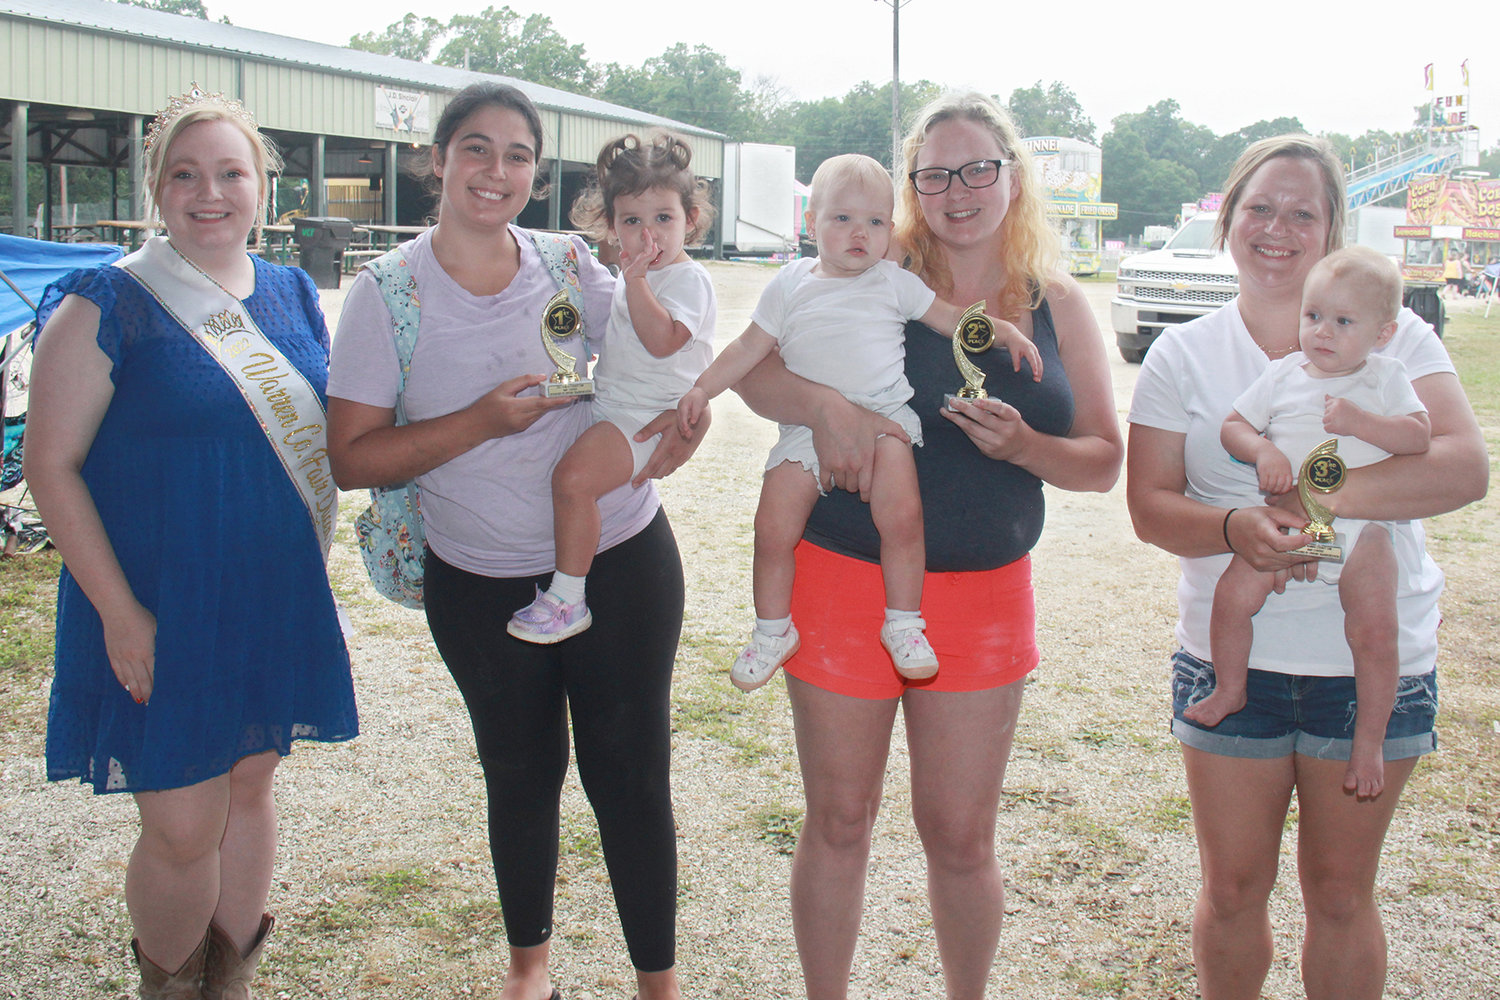 13-18 MONTHS
First place: Ava Lanham, held by Jodi Lanham. Second place: Adelynn Frankenberg, held by Samantha Hackett. Third place: Ethan Jarvis, held by Alexia Jaggie.